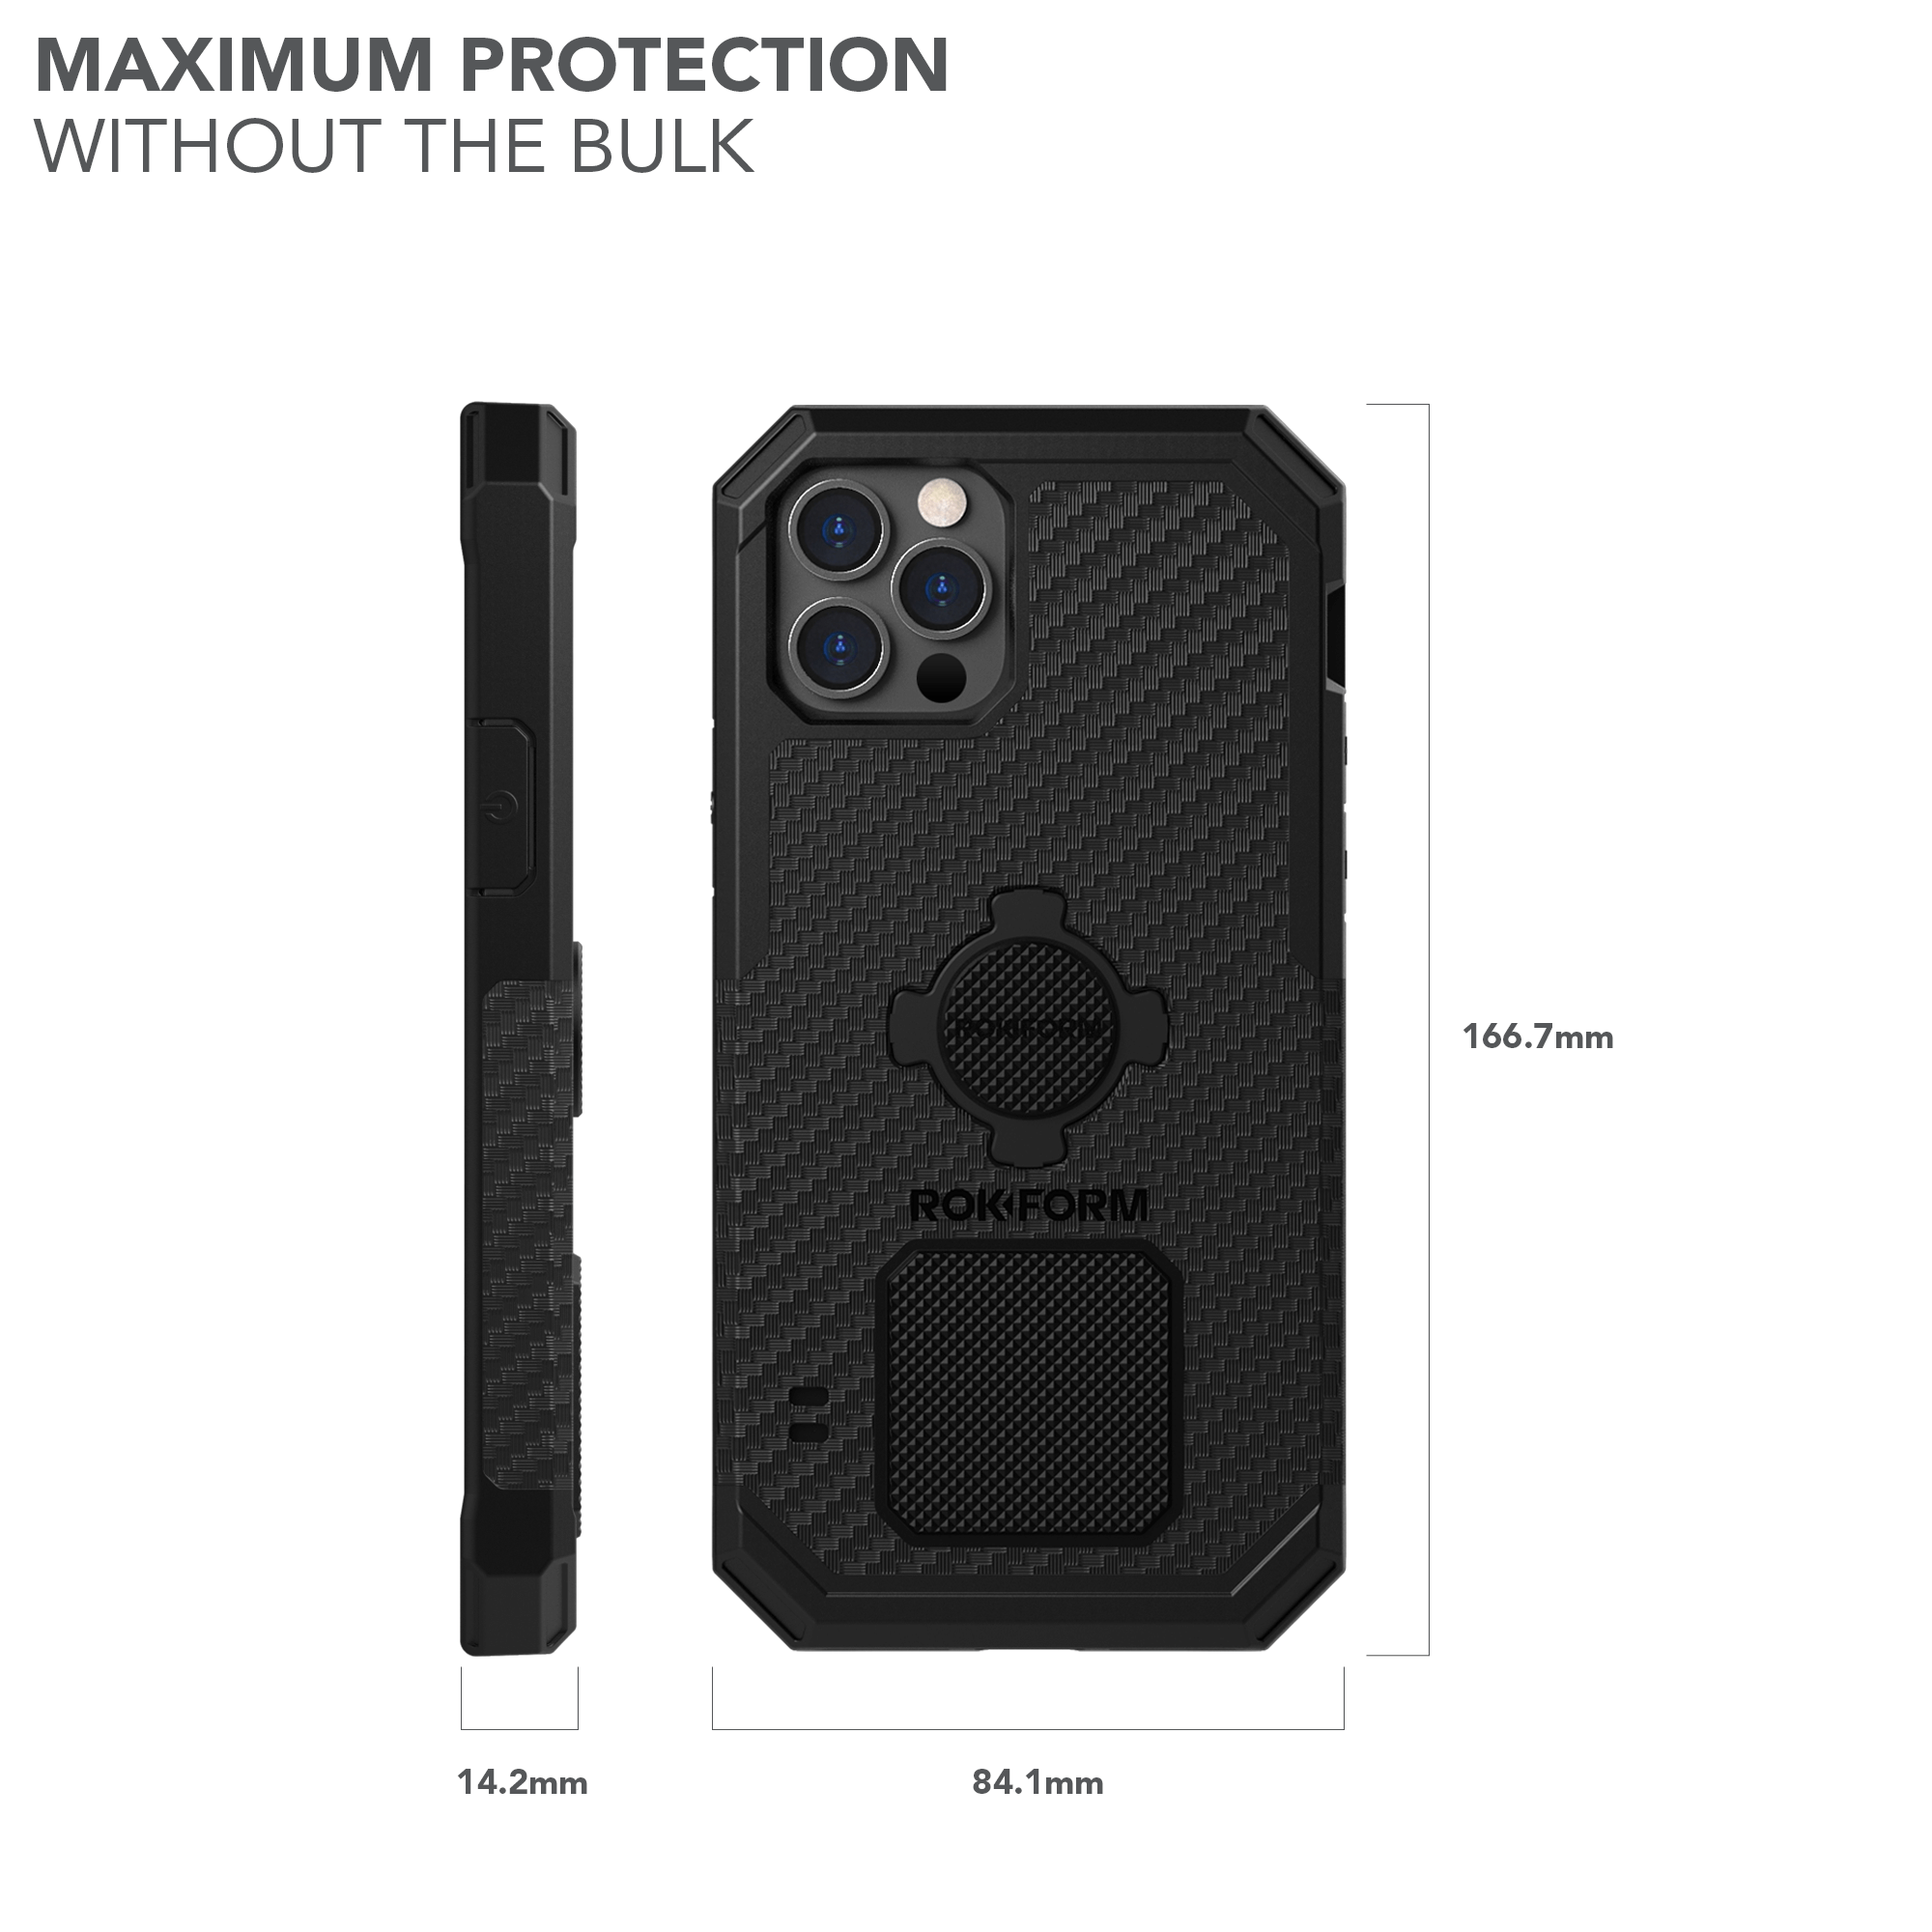 Rugged Case - iPhone 12 Pro Max